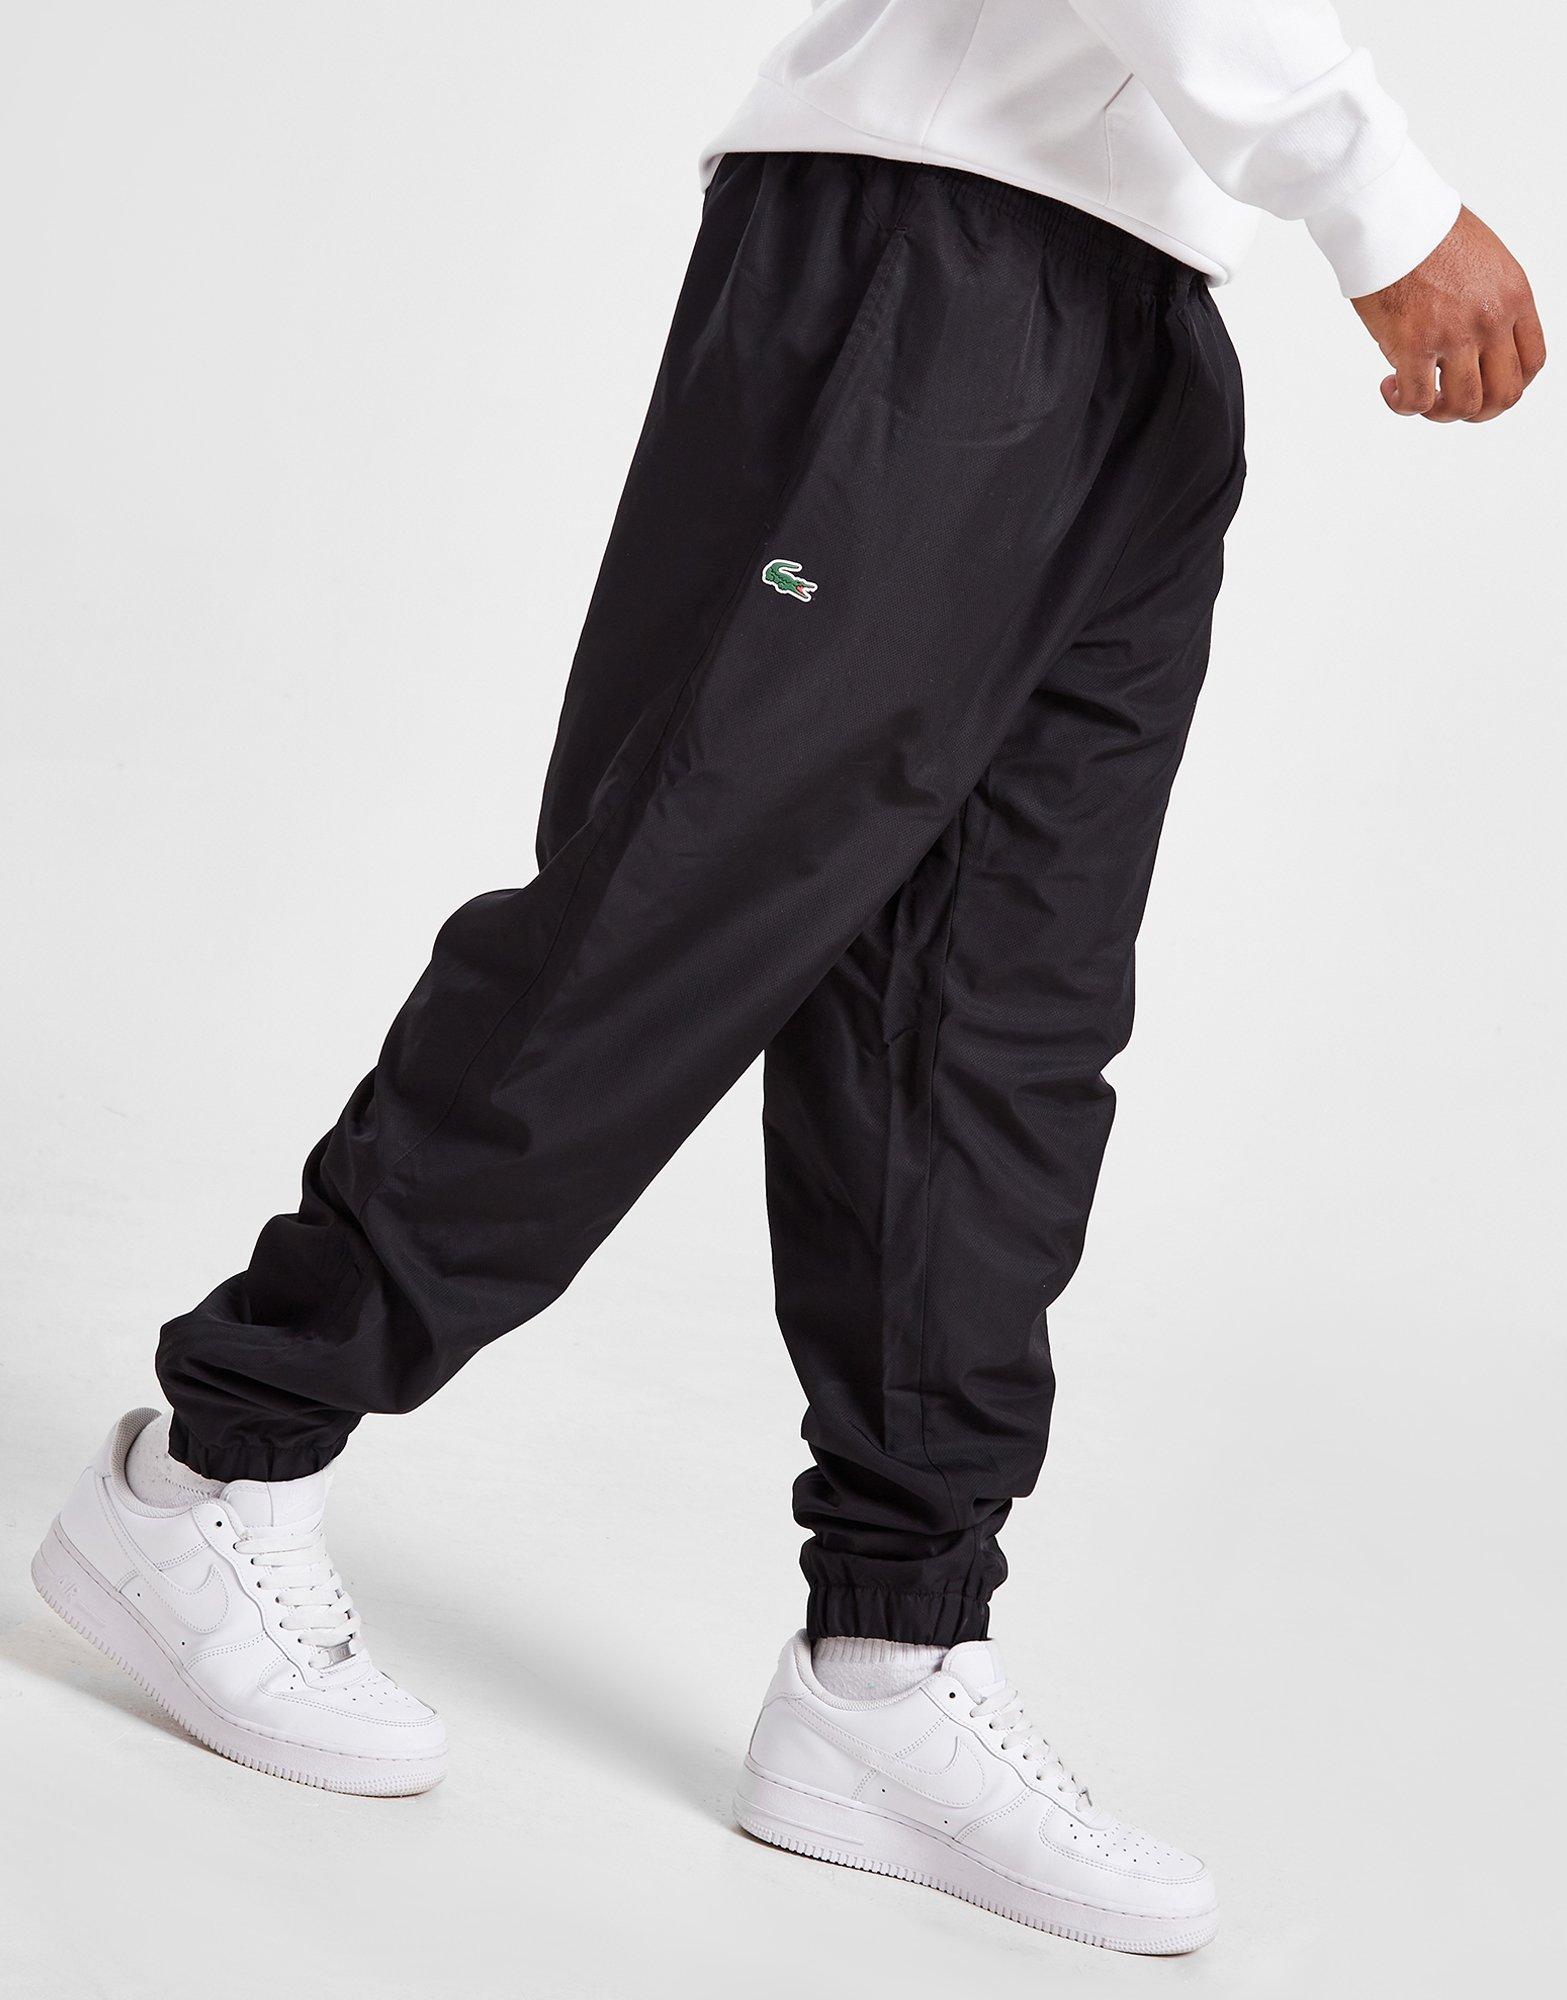 Lacoste Guppy Track Pants - Sports